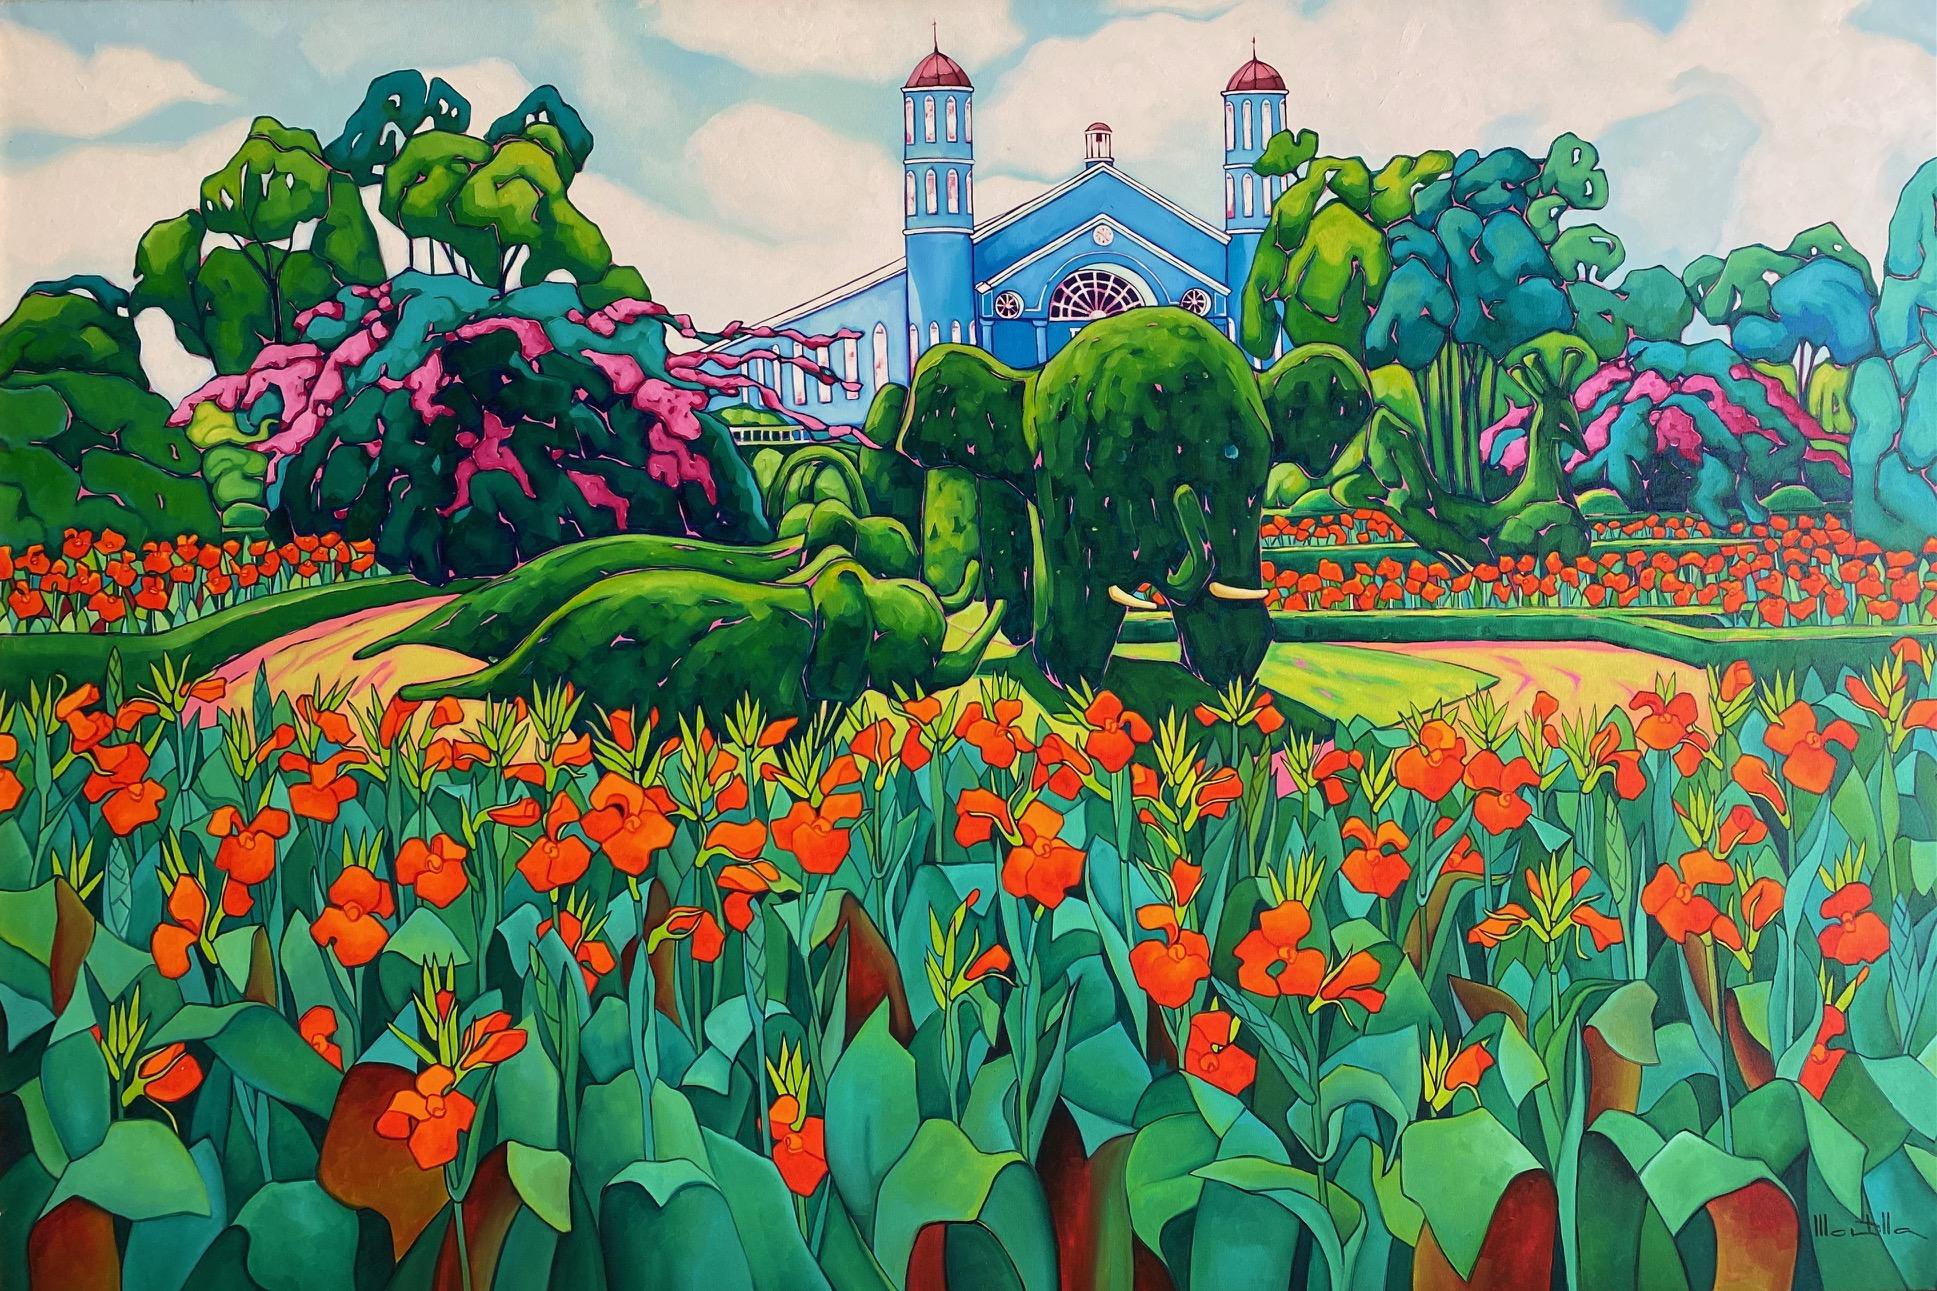 ¨Topiaria¨. Expressionist colorful garden. Big format Oil on canvas - Painting by Chico Montilla